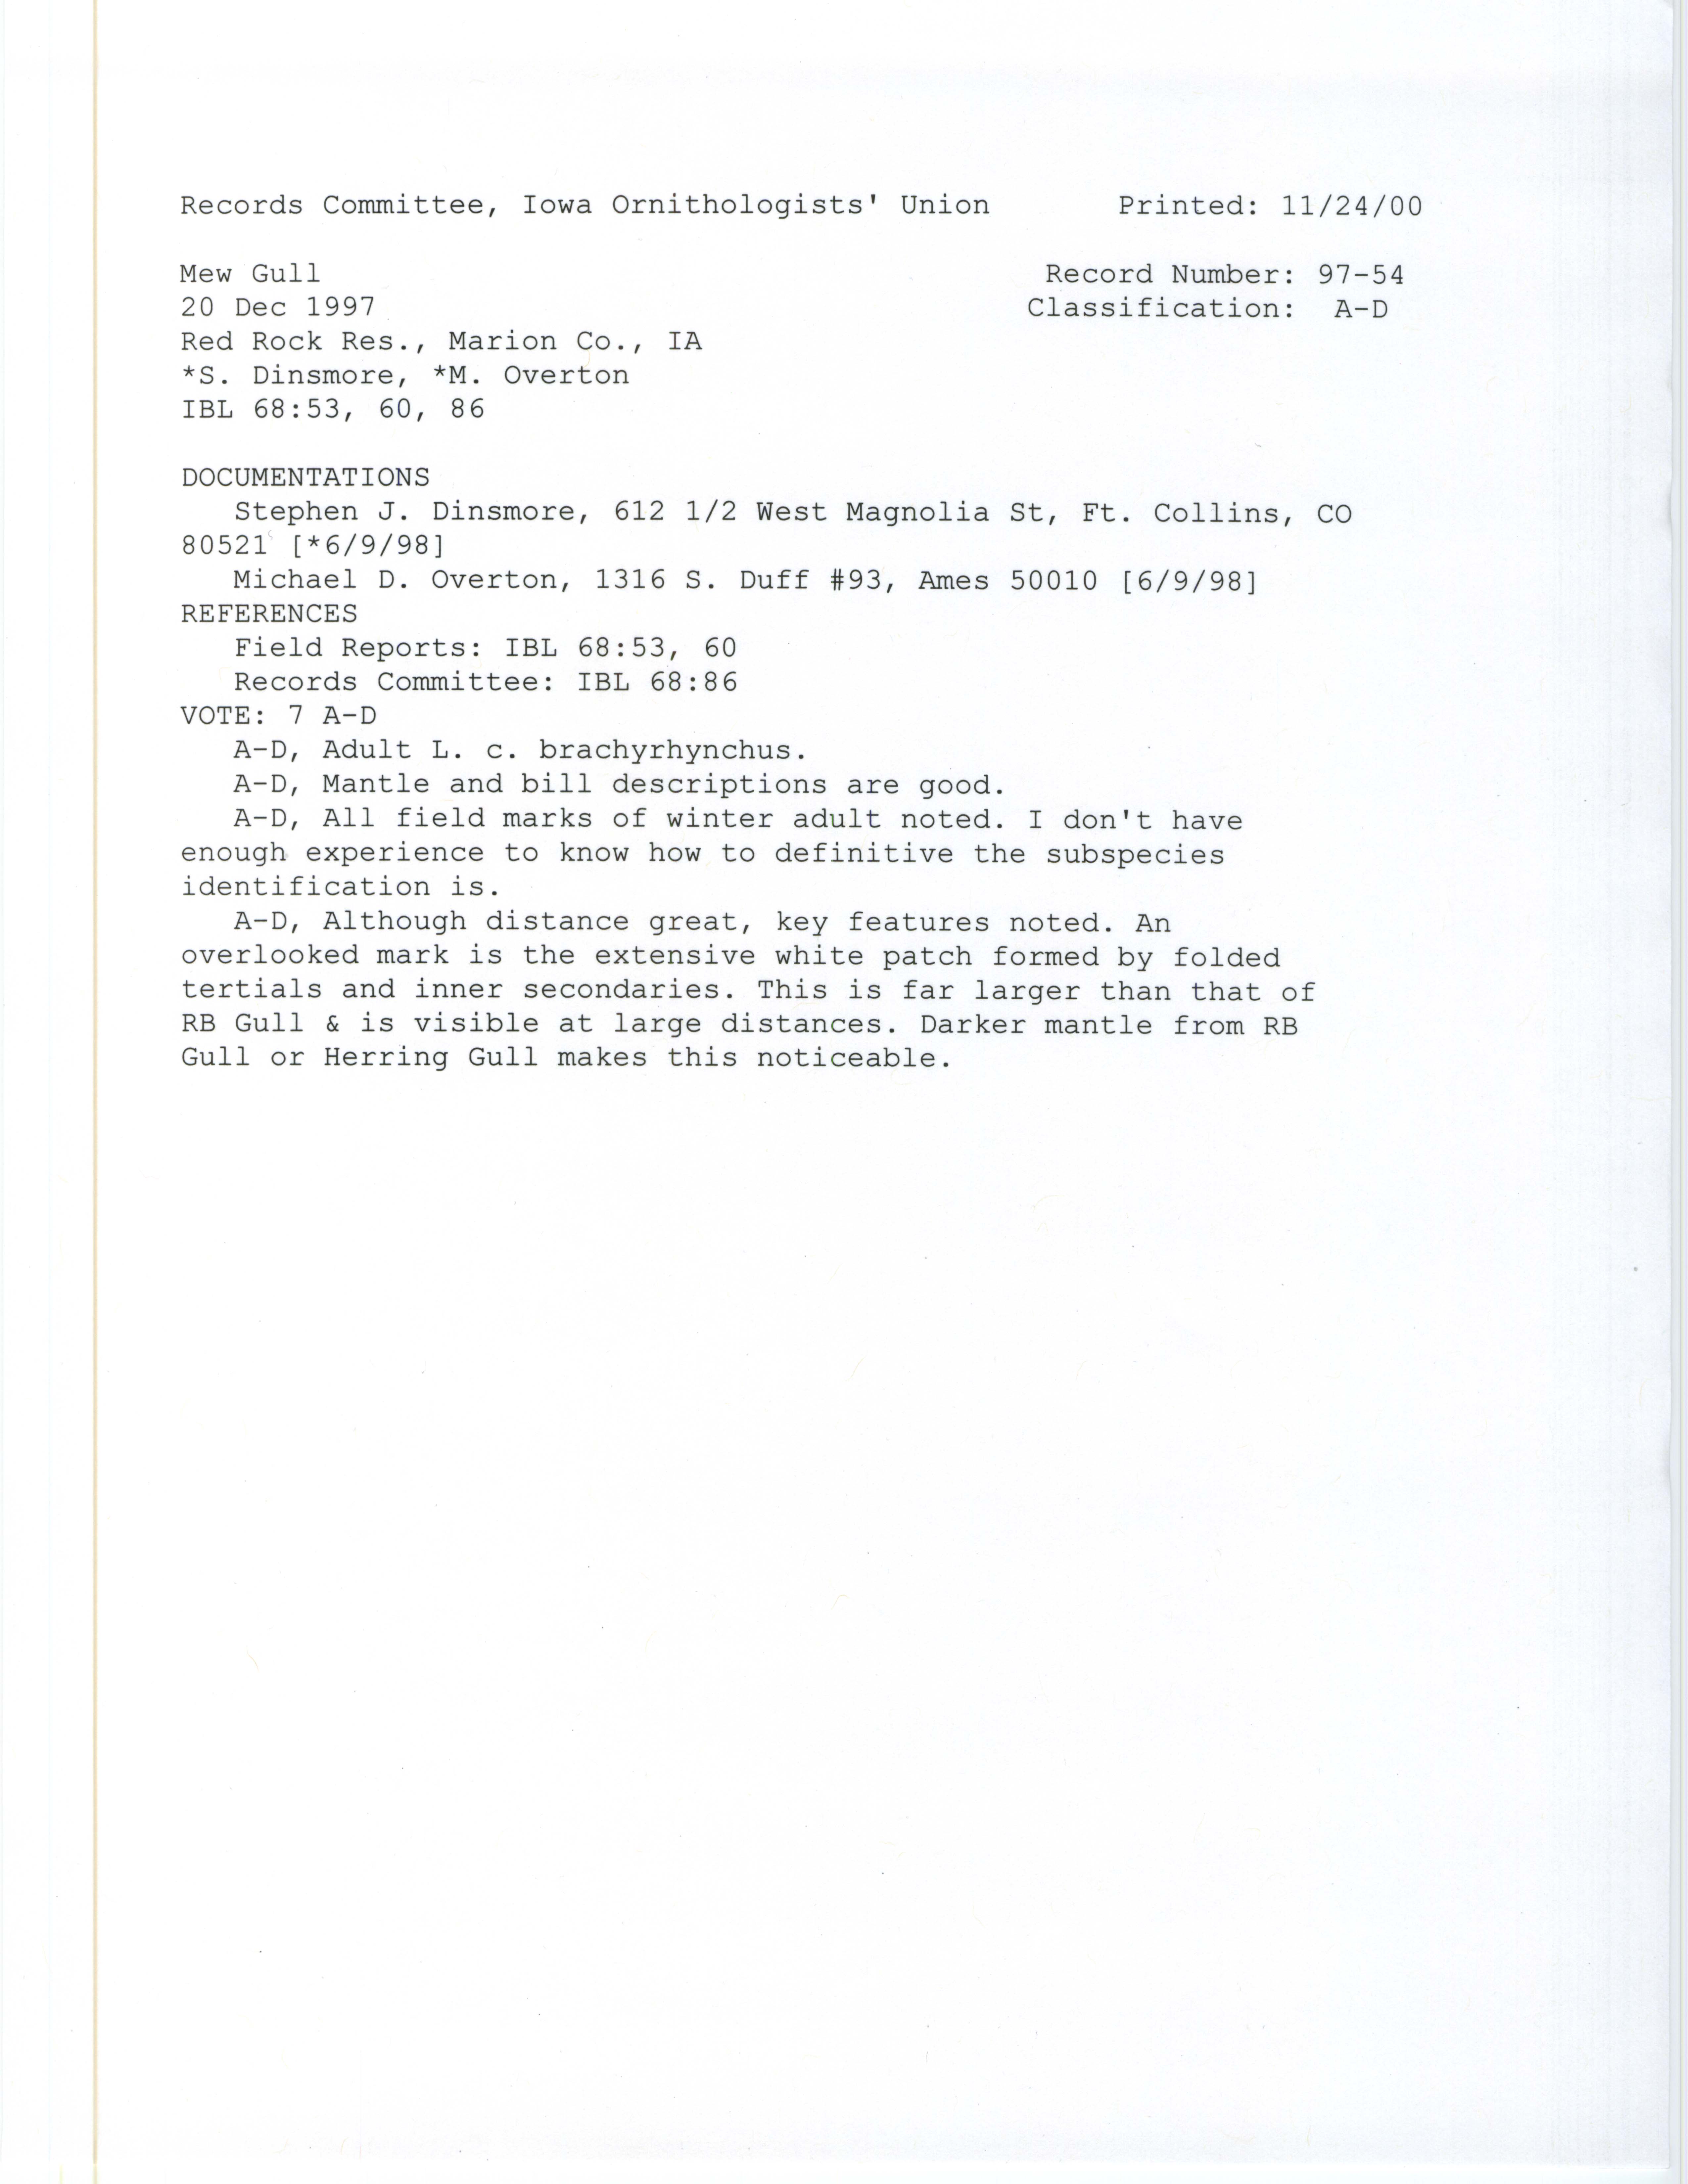 Records Committee review for rare bird sighting of Mew Gull at Red Rock Reservoir Dam, 1997